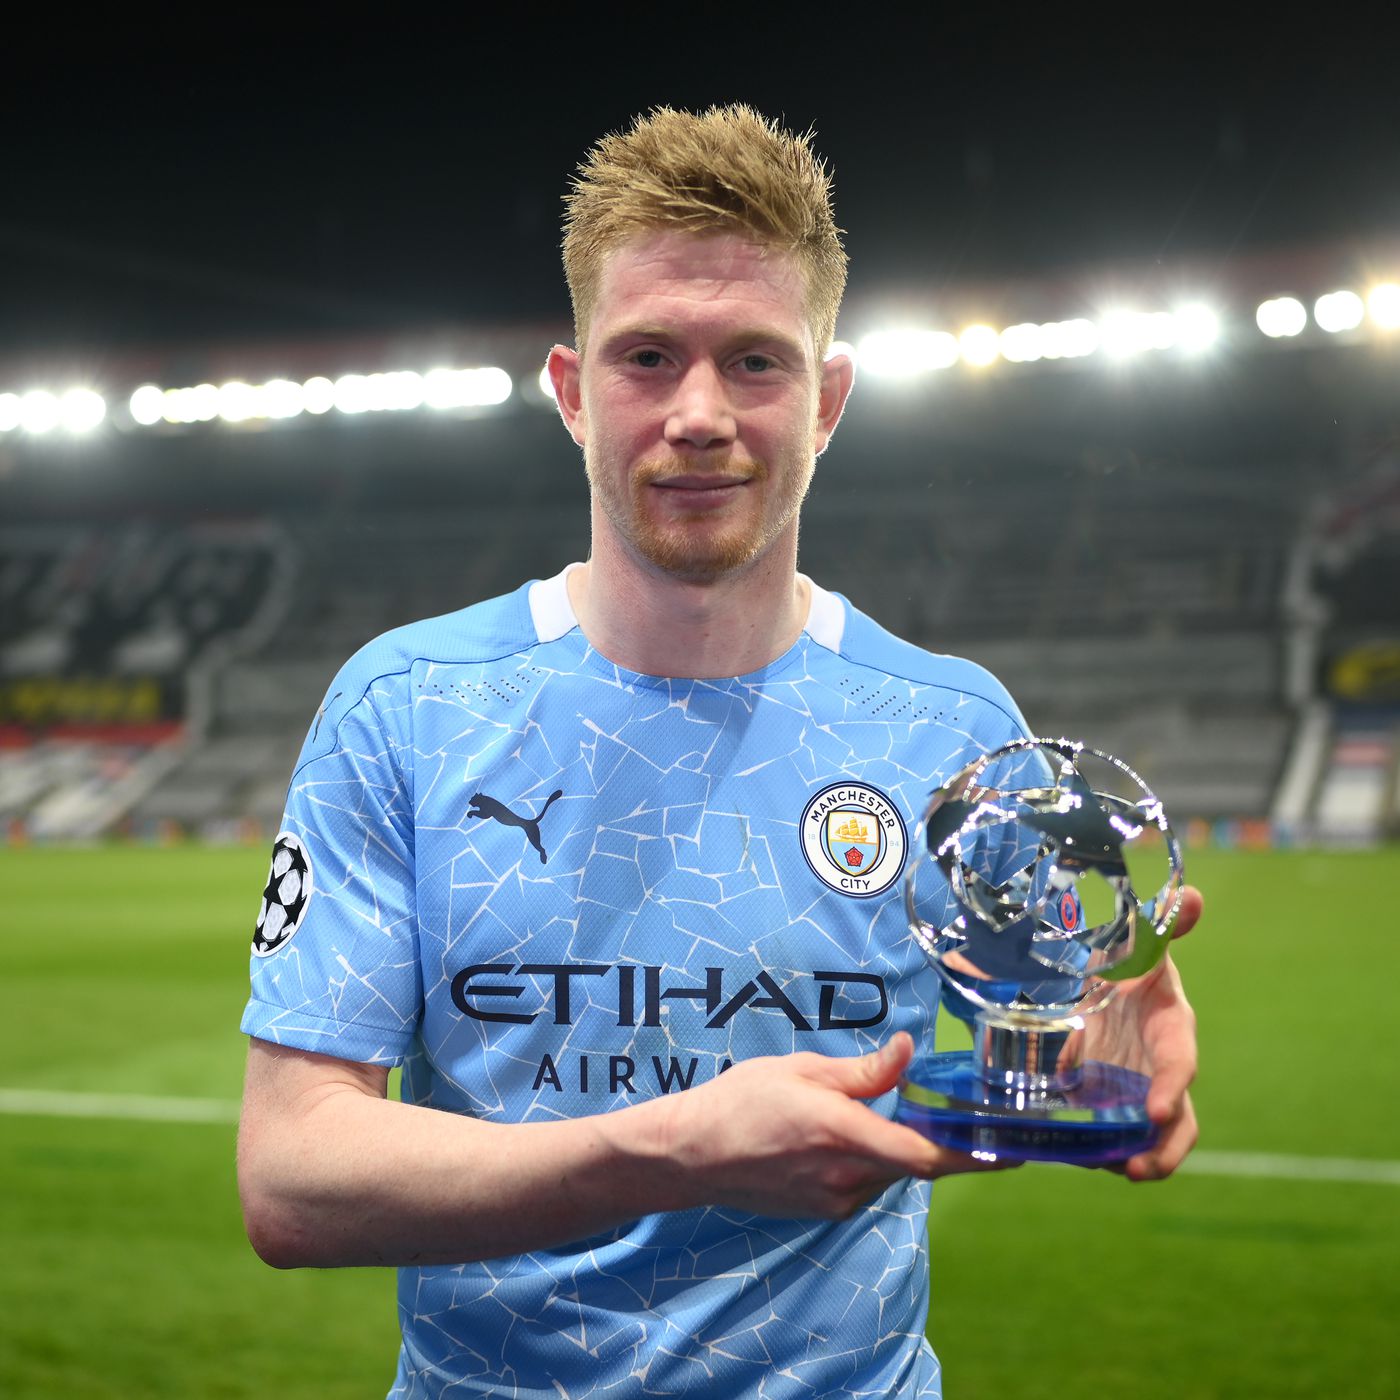 Kevin De Bruyne: “Second half we did really well, we tried to find the spaces more patiently.” - Bitter and Blue